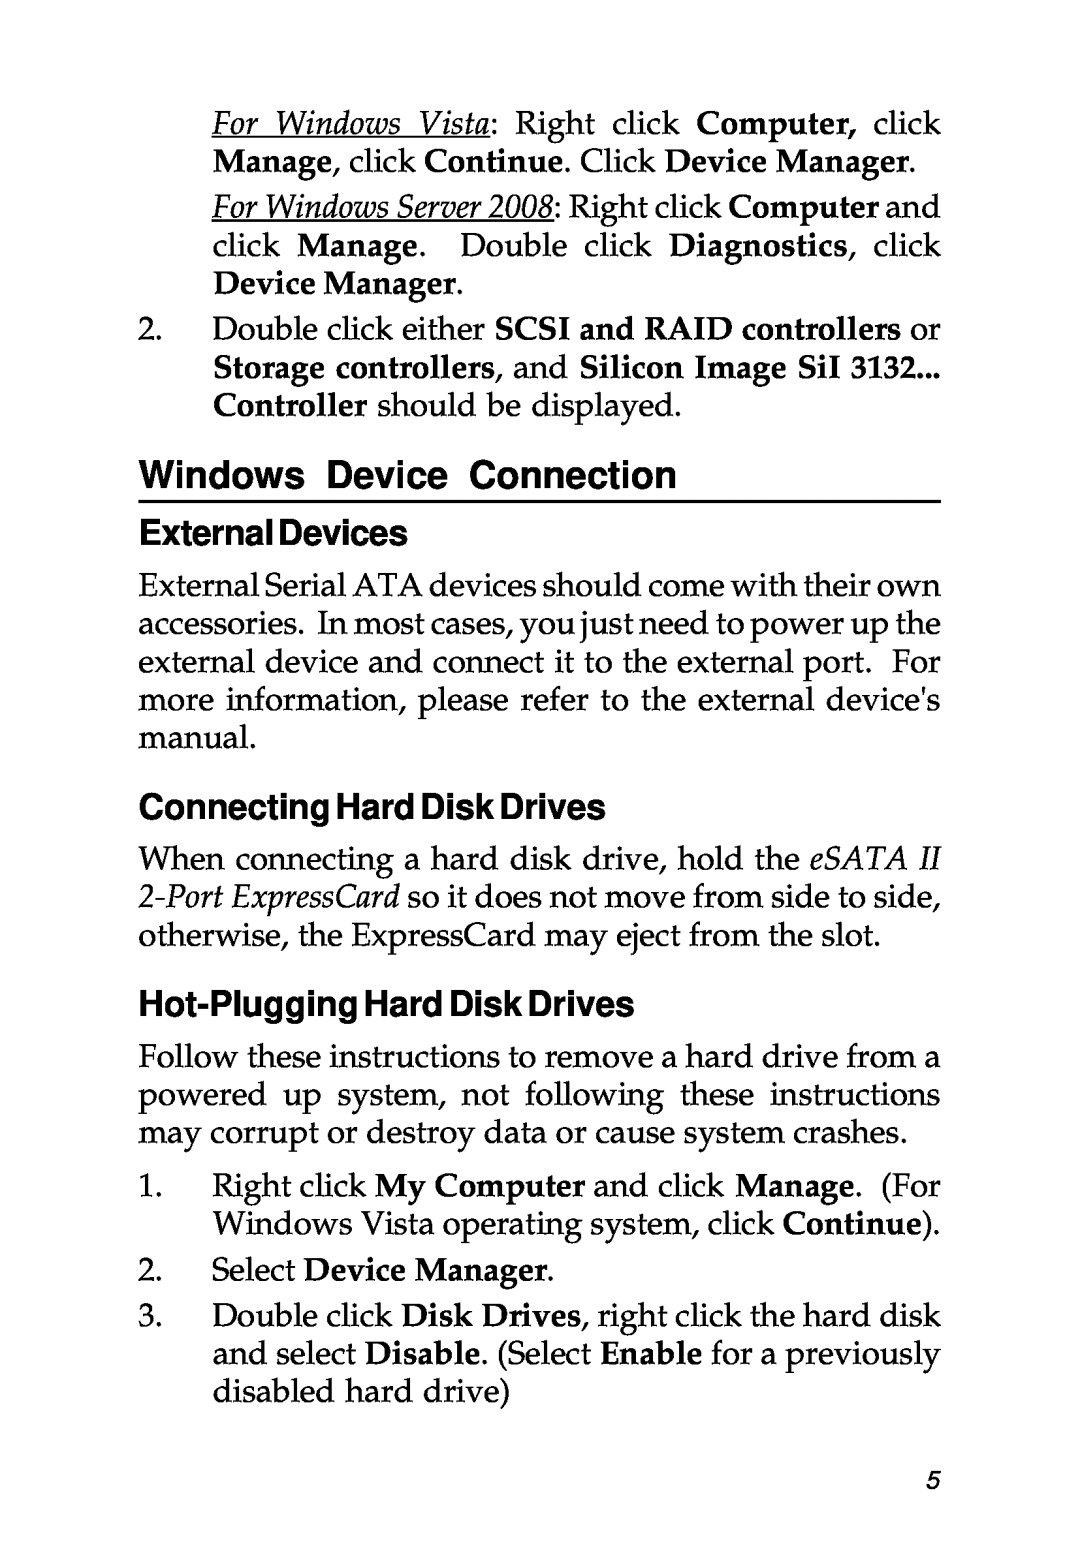 SIIG 104-0487A Windows Device Connection, External Devices, Connecting Hard Disk Drives, Hot-Plugging Hard Disk Drives 